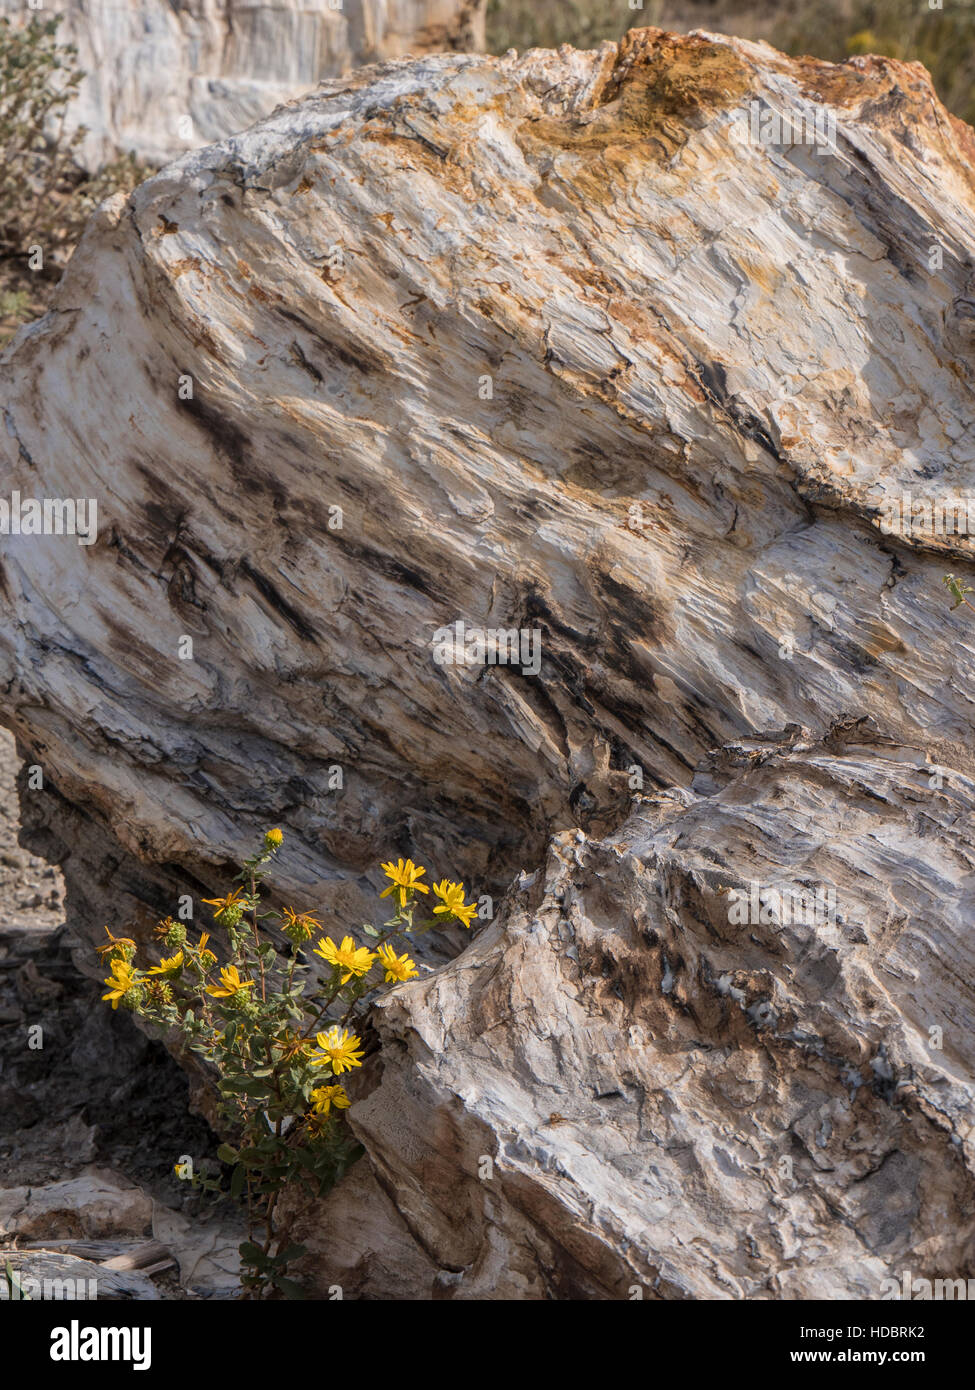 Golden aster and petrified wood, South Petrified Forest, South Unit, Theodore Roosevelt National Park, North Dakota. Stock Photo